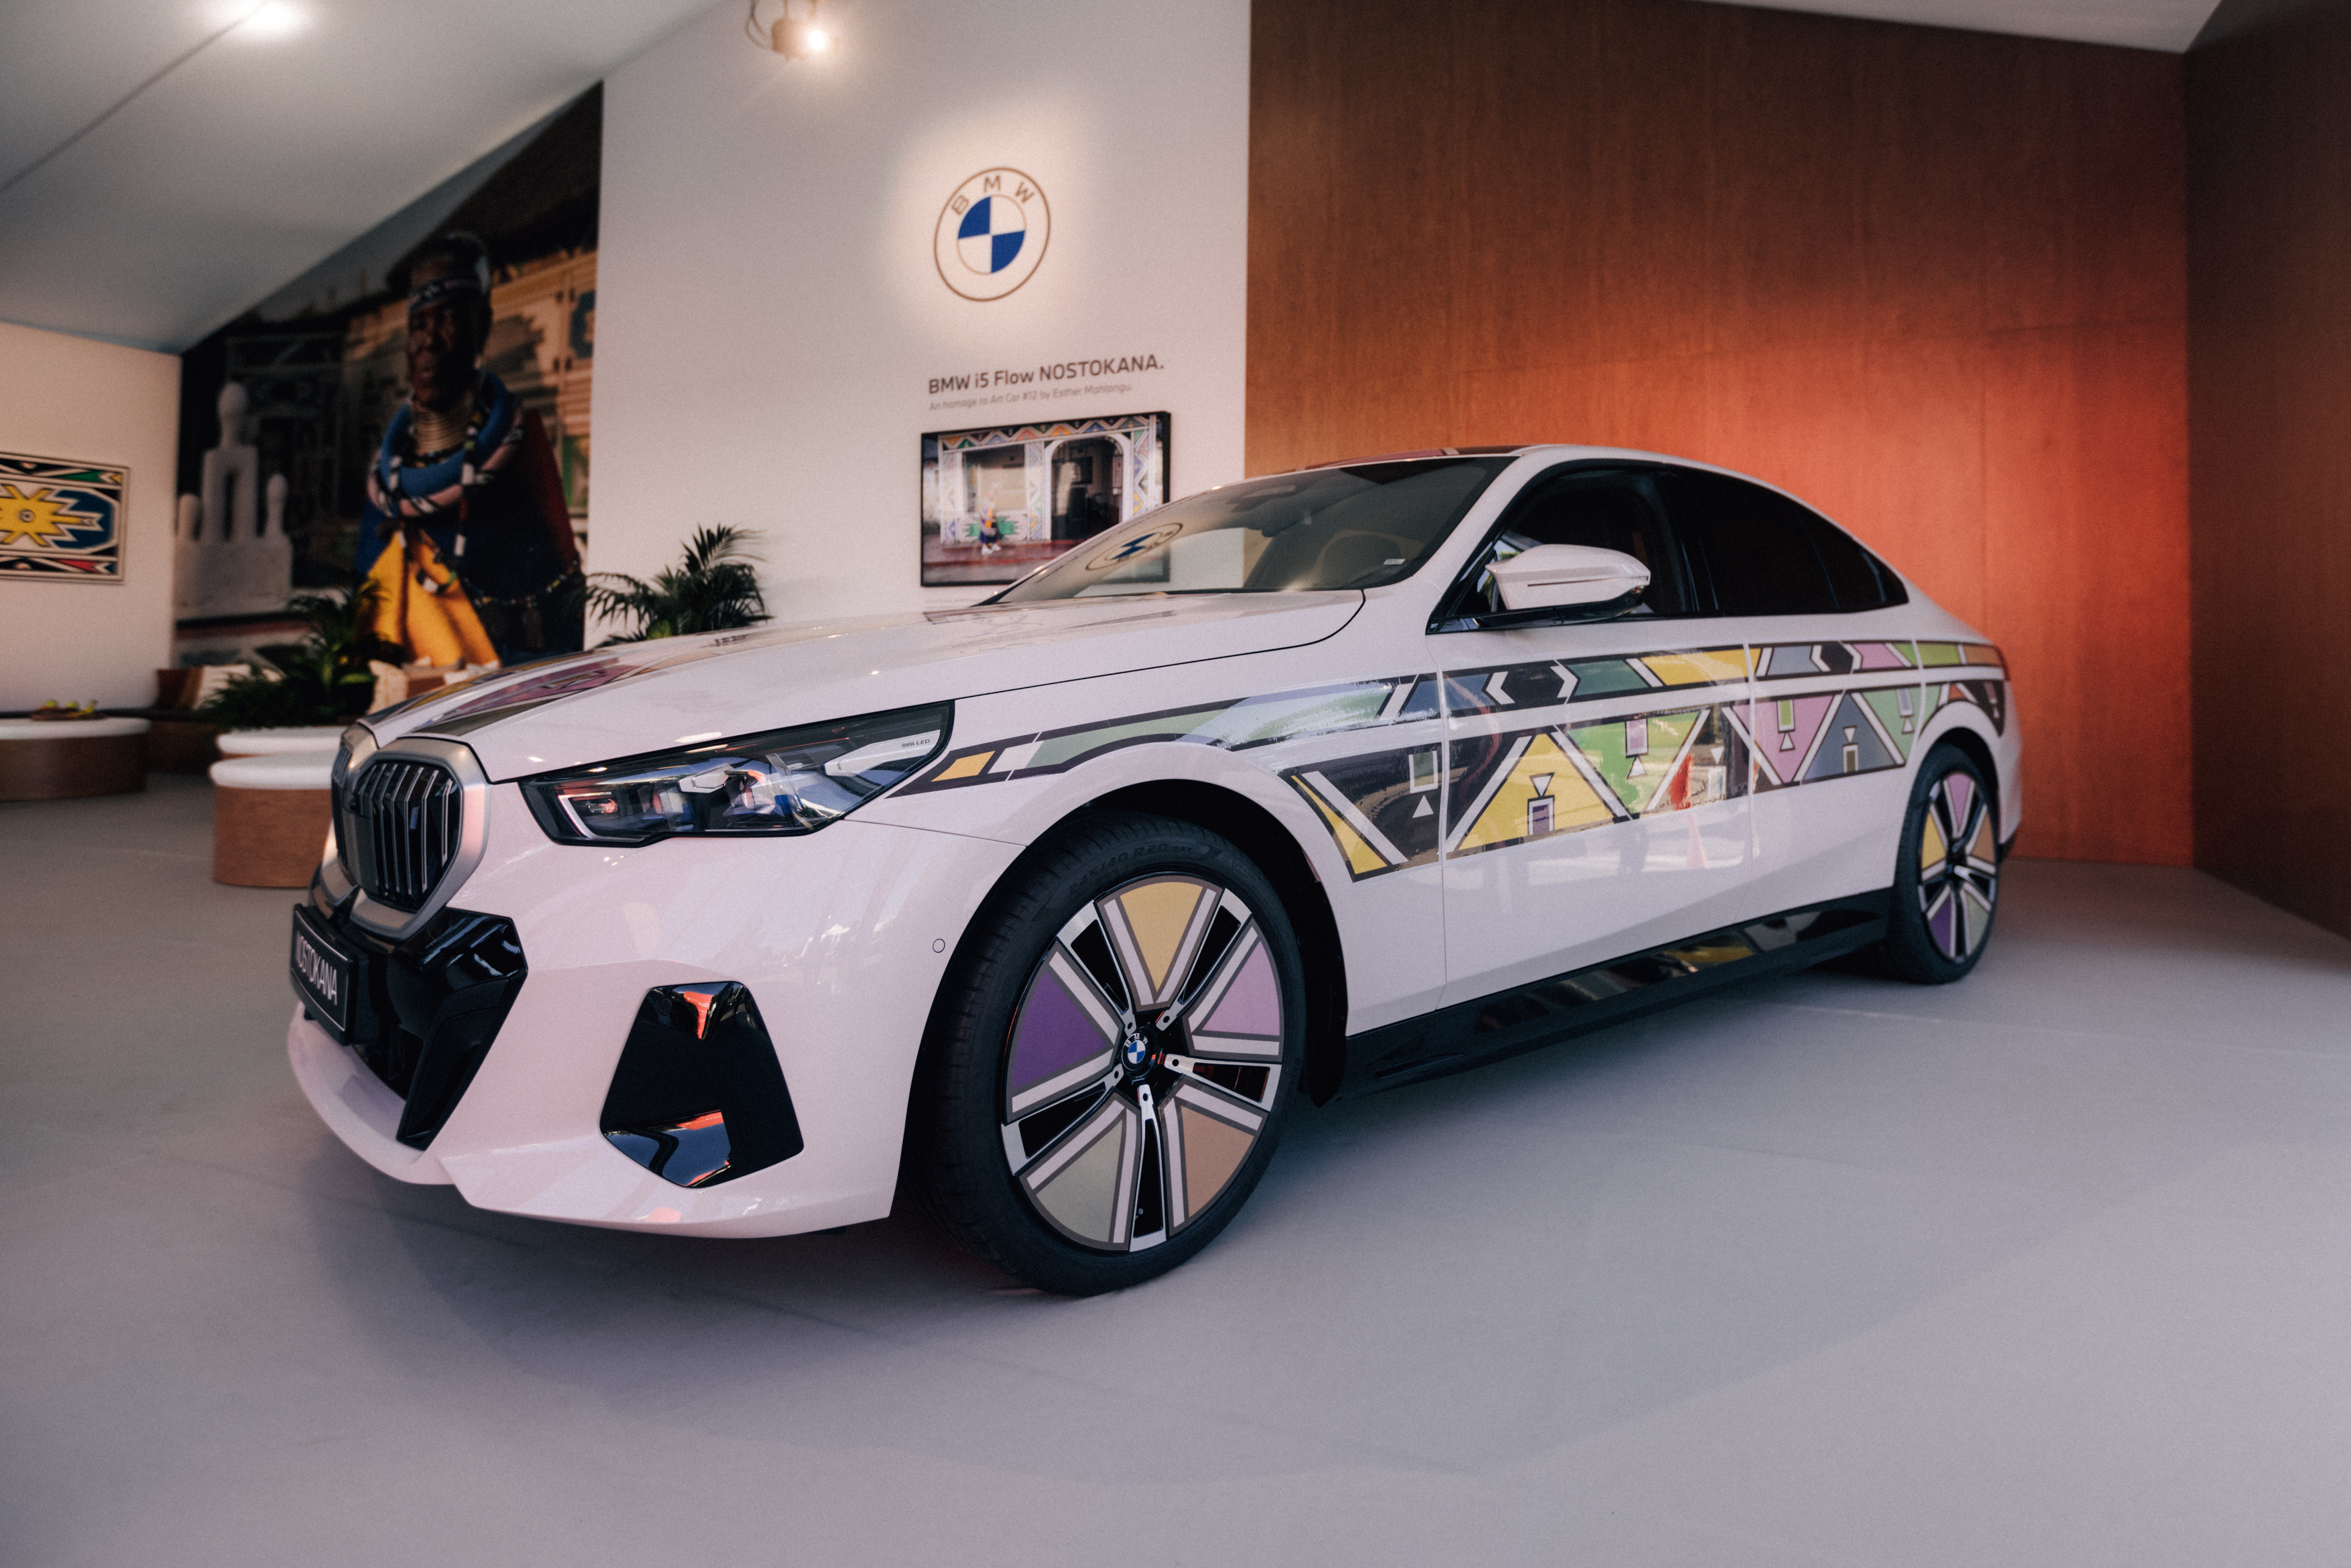 BMW car with a unique geometric pattern displayed in an indoor setting, no people in the image